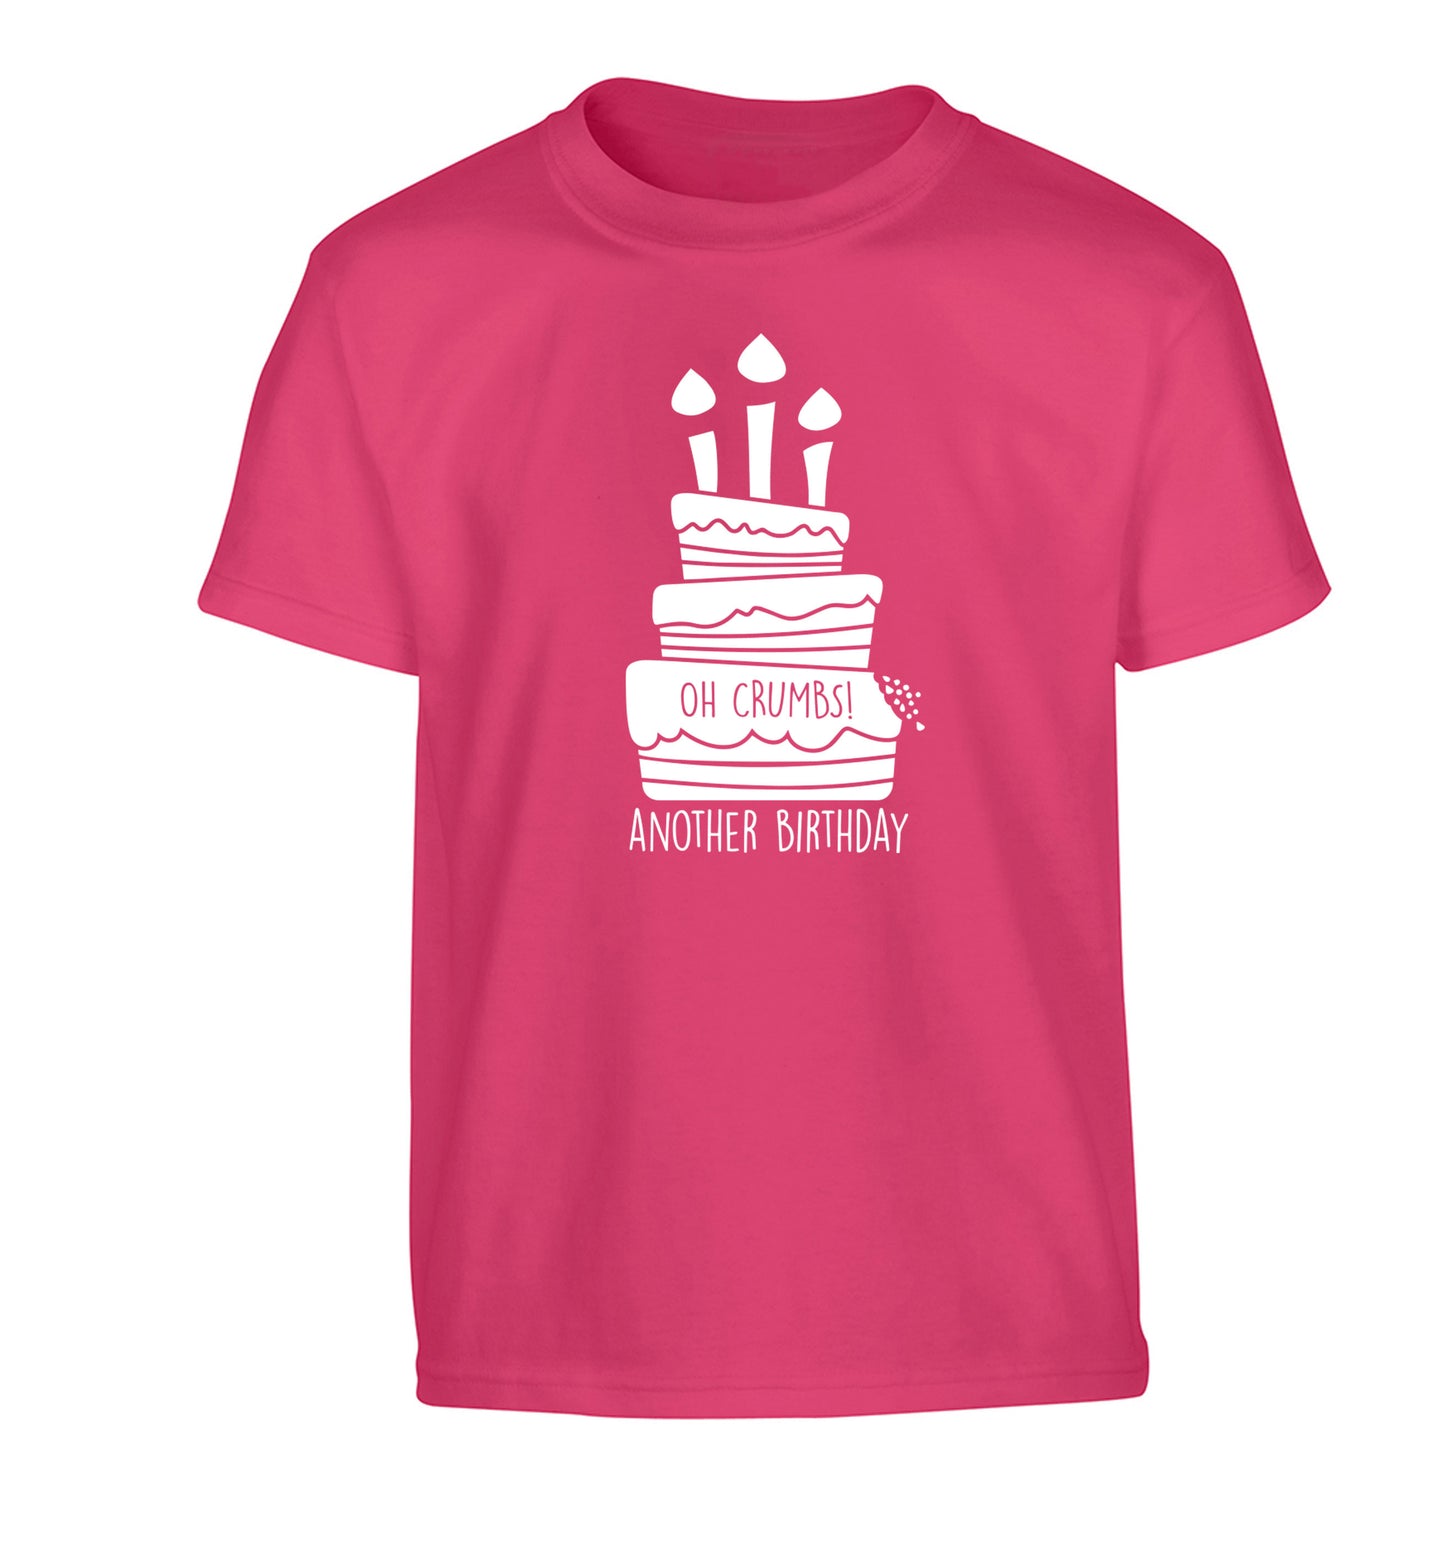 Oh crumbs another birthday! Children's pink Tshirt 12-14 Years